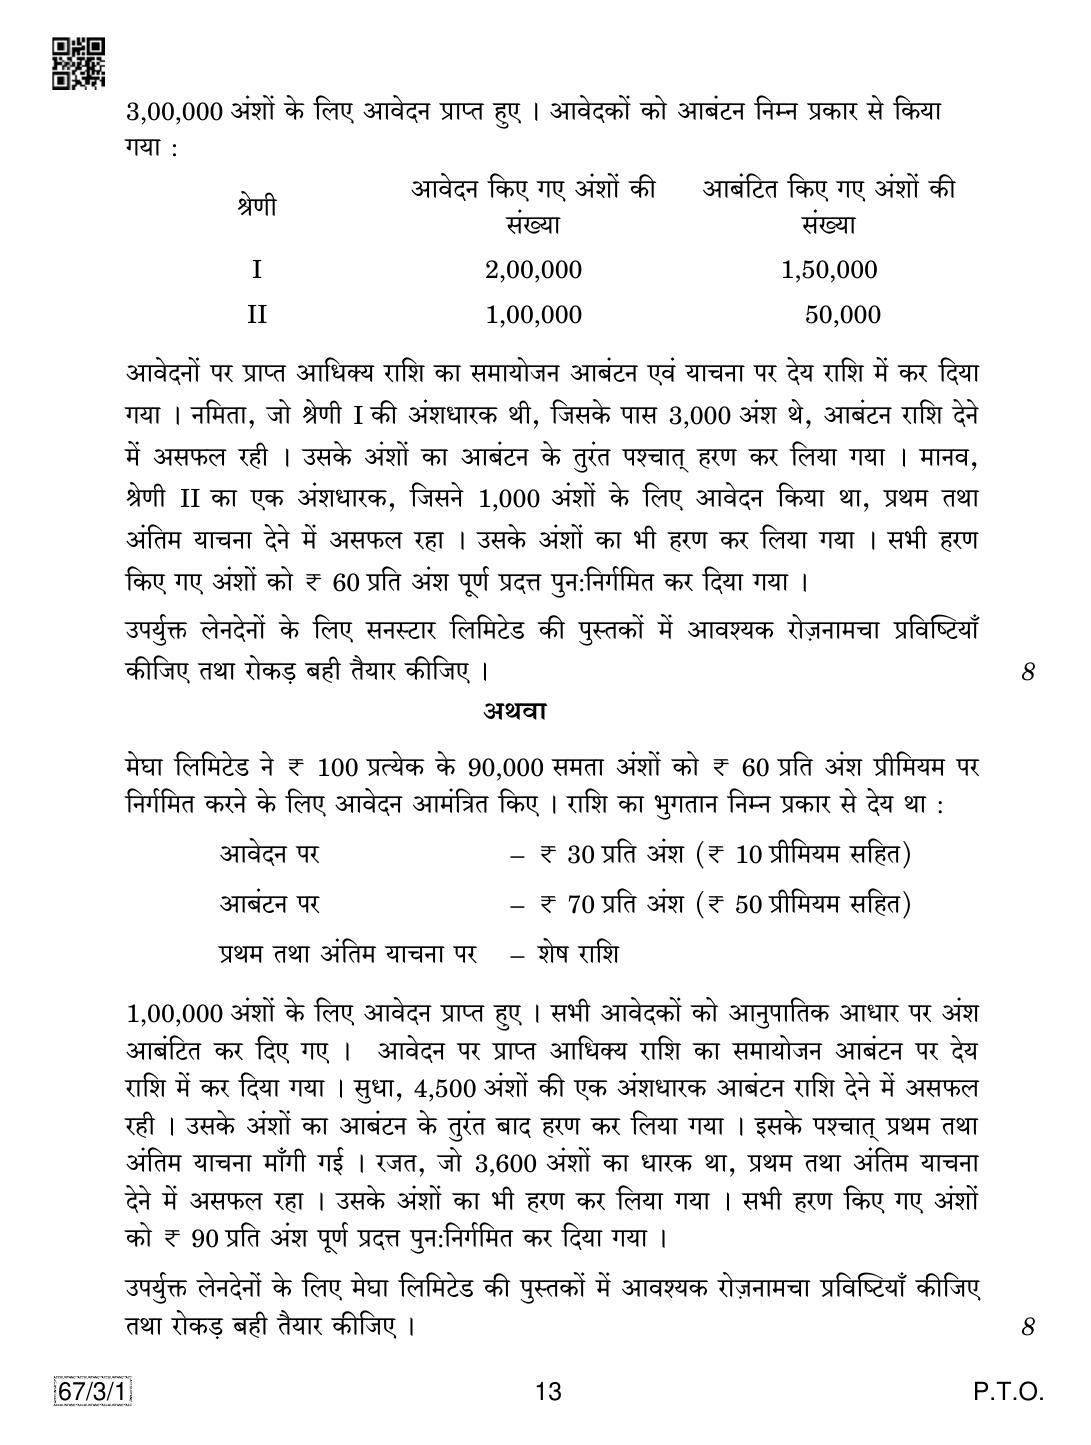 CBSE Class 12 67-3-1 Accountancy 2019 Question Paper - Page 13